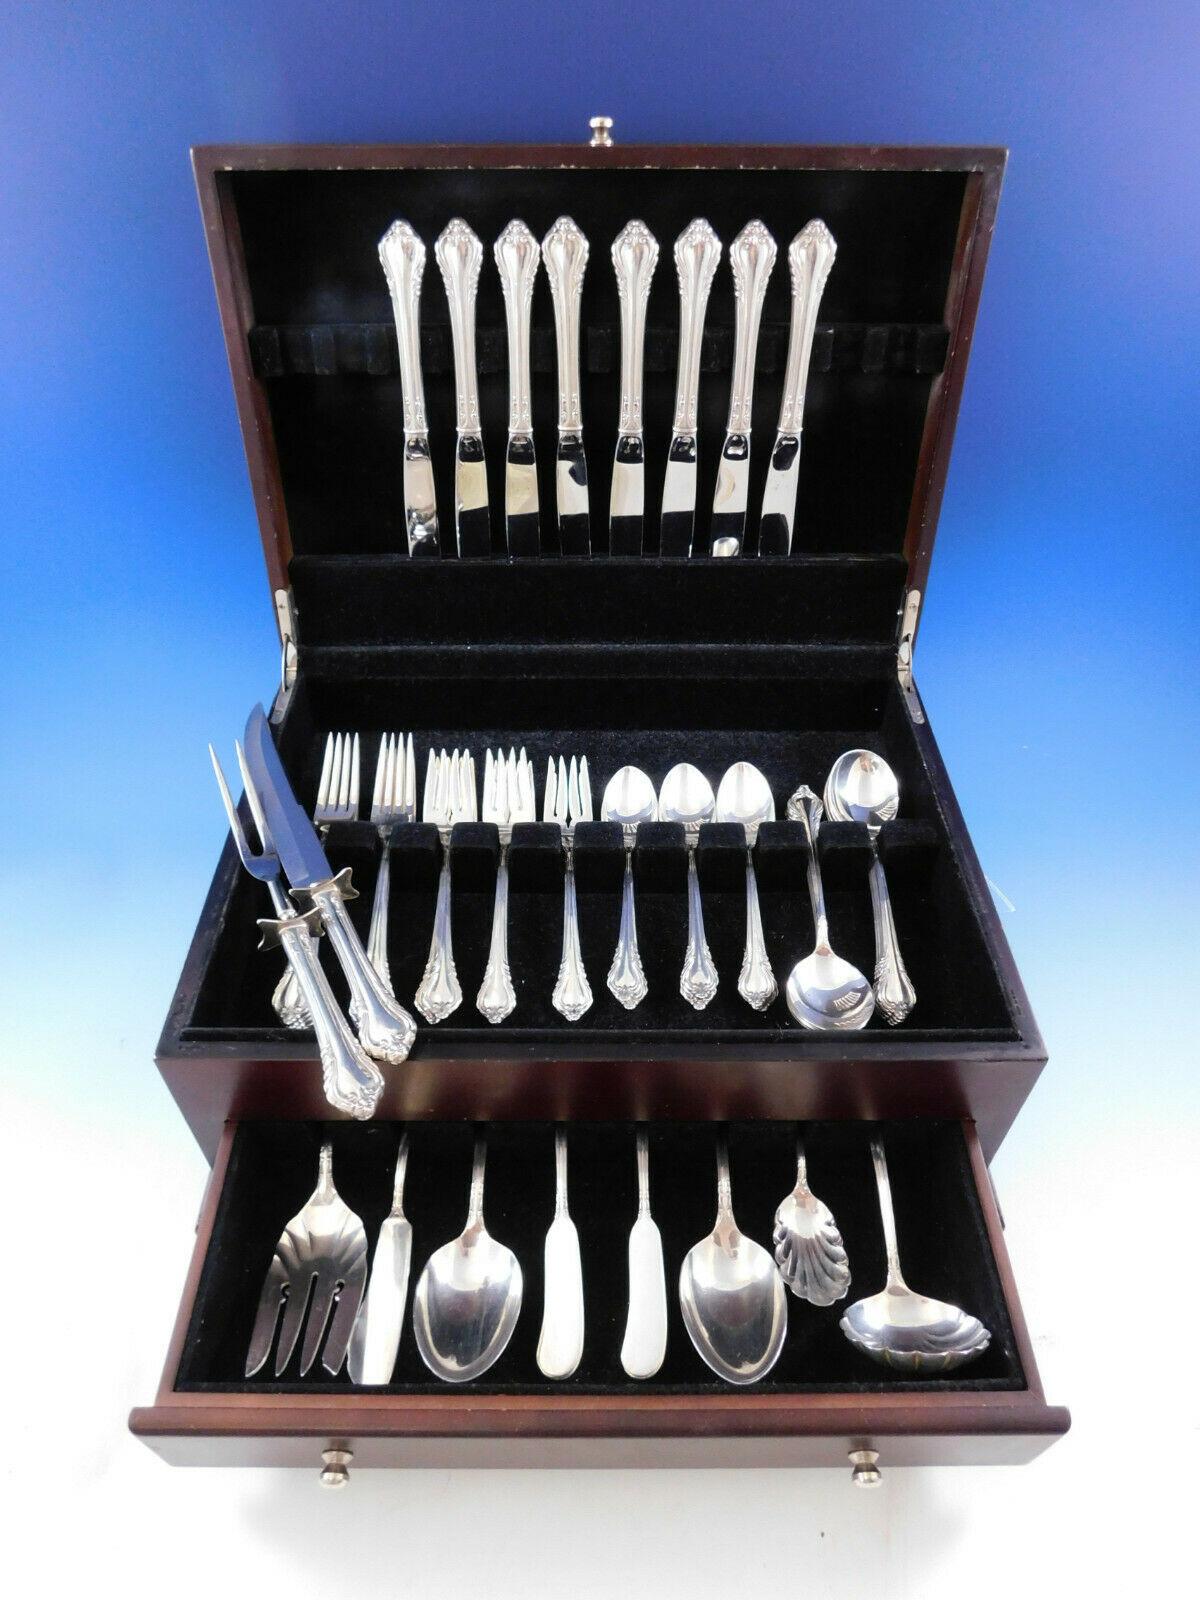 Grand recollection-tradition by International sterling silver flatware set - 56 pieces. This set includes:

8 Knives, 9 1/4